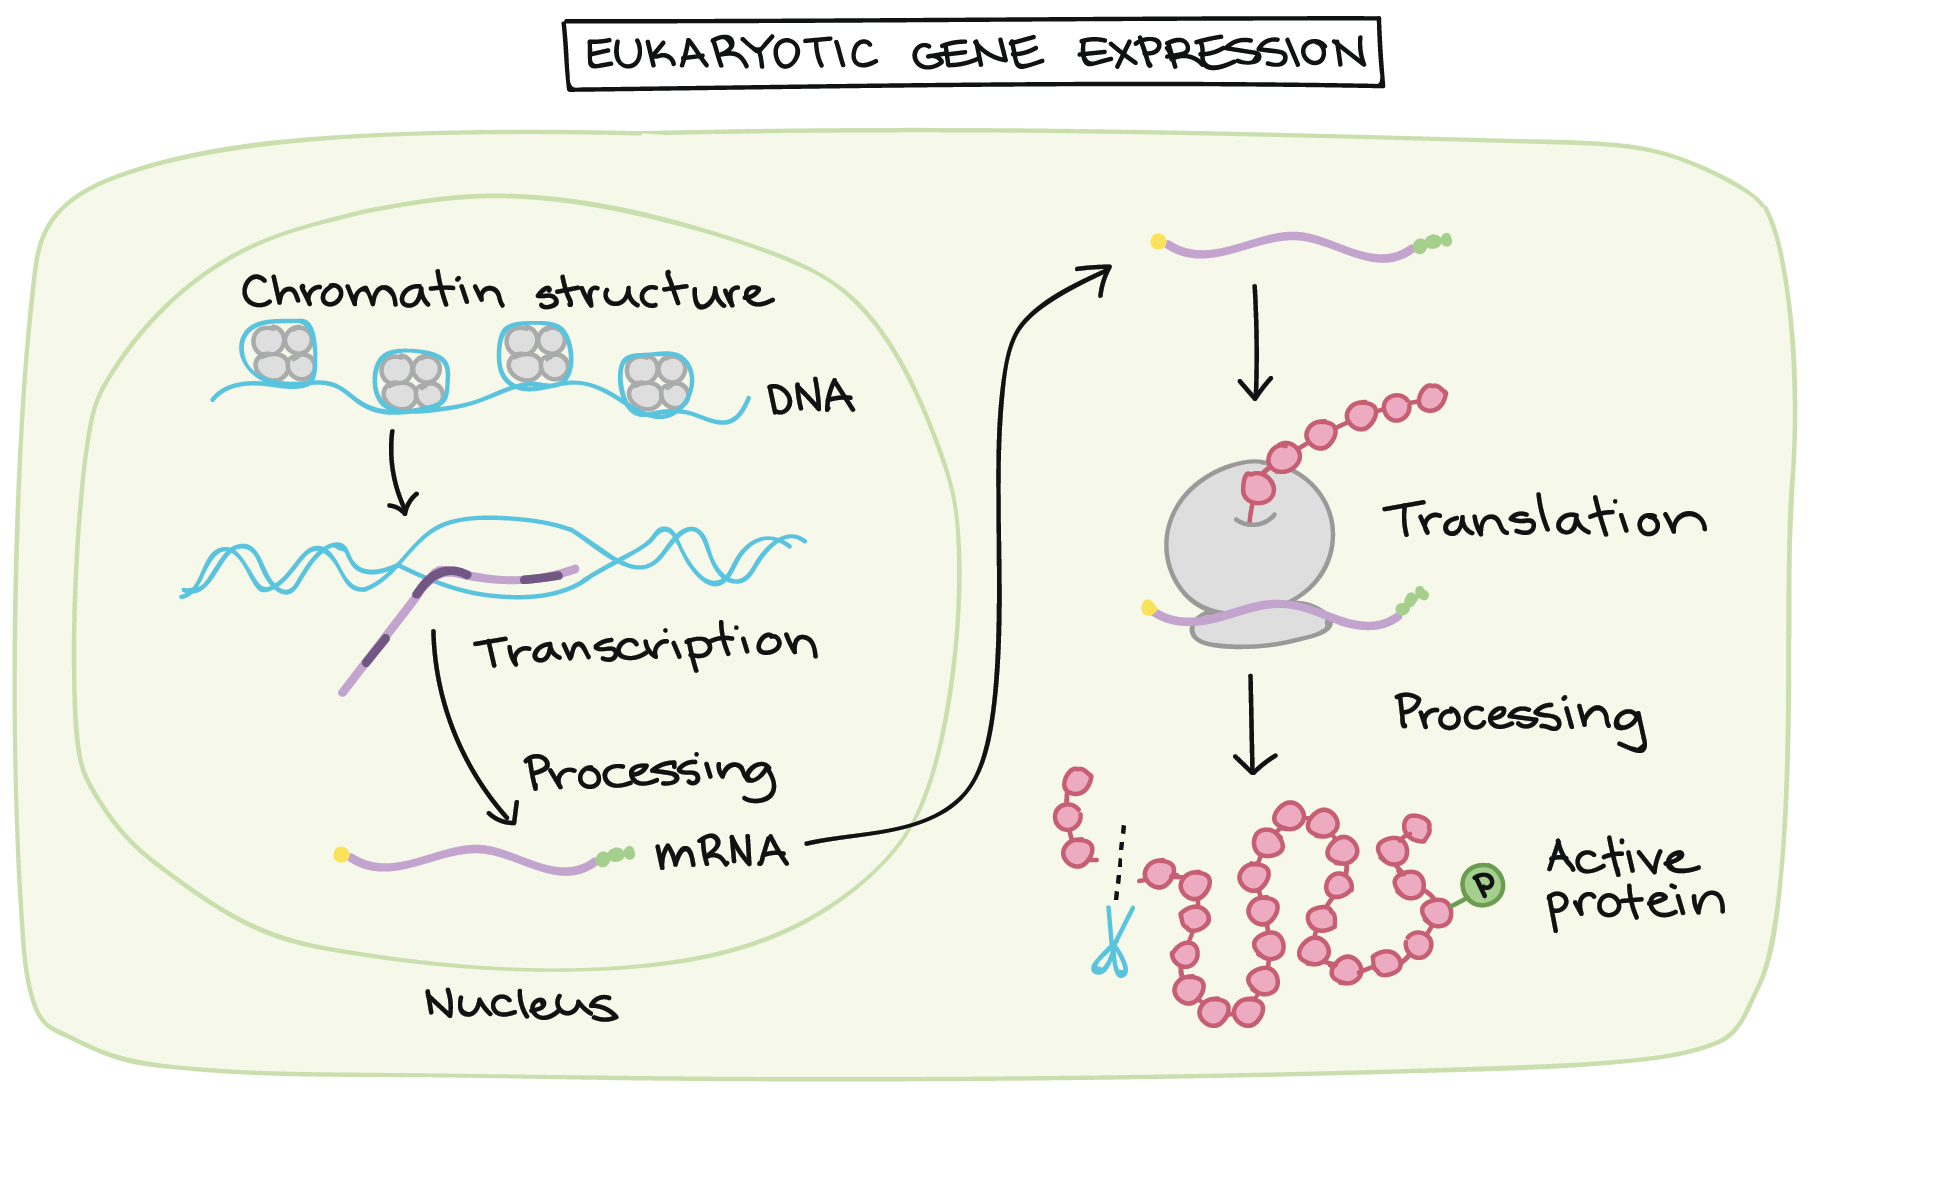 Stages of eukaryotic gene expression (any of which can be potentially regulated).

1. Chromatin structure. Chromatin may be tightly compacted or loose and open.

2. Transcription. An available gene (with sufficiently open chromatin) is transcribed to make a primary transcript.

3. Processing and export. The primary transcript is processed (spliced, capped, given a poly-A tail) and shipped out of the nucleus.

4. mRNA stability. In the cytosol, the mRNA may be stable for long periods of time or may be quickly degraded (broken down).

5. Translation. The mRNA may be translated more or less readily/frequently by ribosomes to make a polypeptide.

6. Protein processing. The polypeptide may undergo various types of processing, including proteolytic cleavage (snipping off of amino acids) and addition of chemical modifications, such as phosphate groups.

All these steps (if applicable) need to be executed for a given gene for an active protein to be present in the cell.